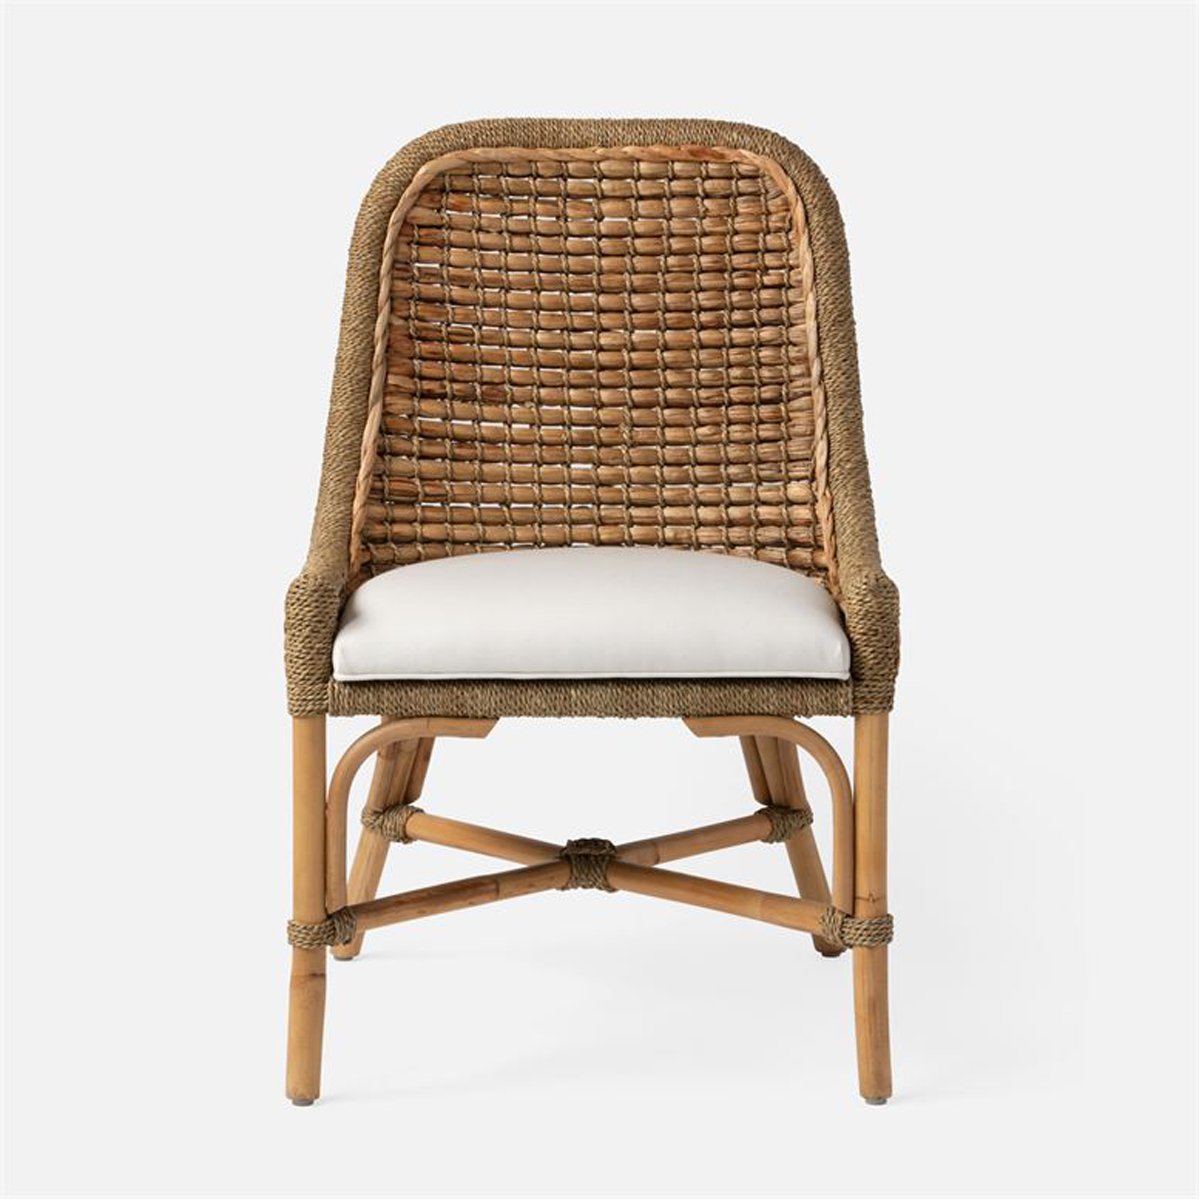 Made Goods Summer Water Hyacinth Dining Chair in Brenta Cotton/Jute